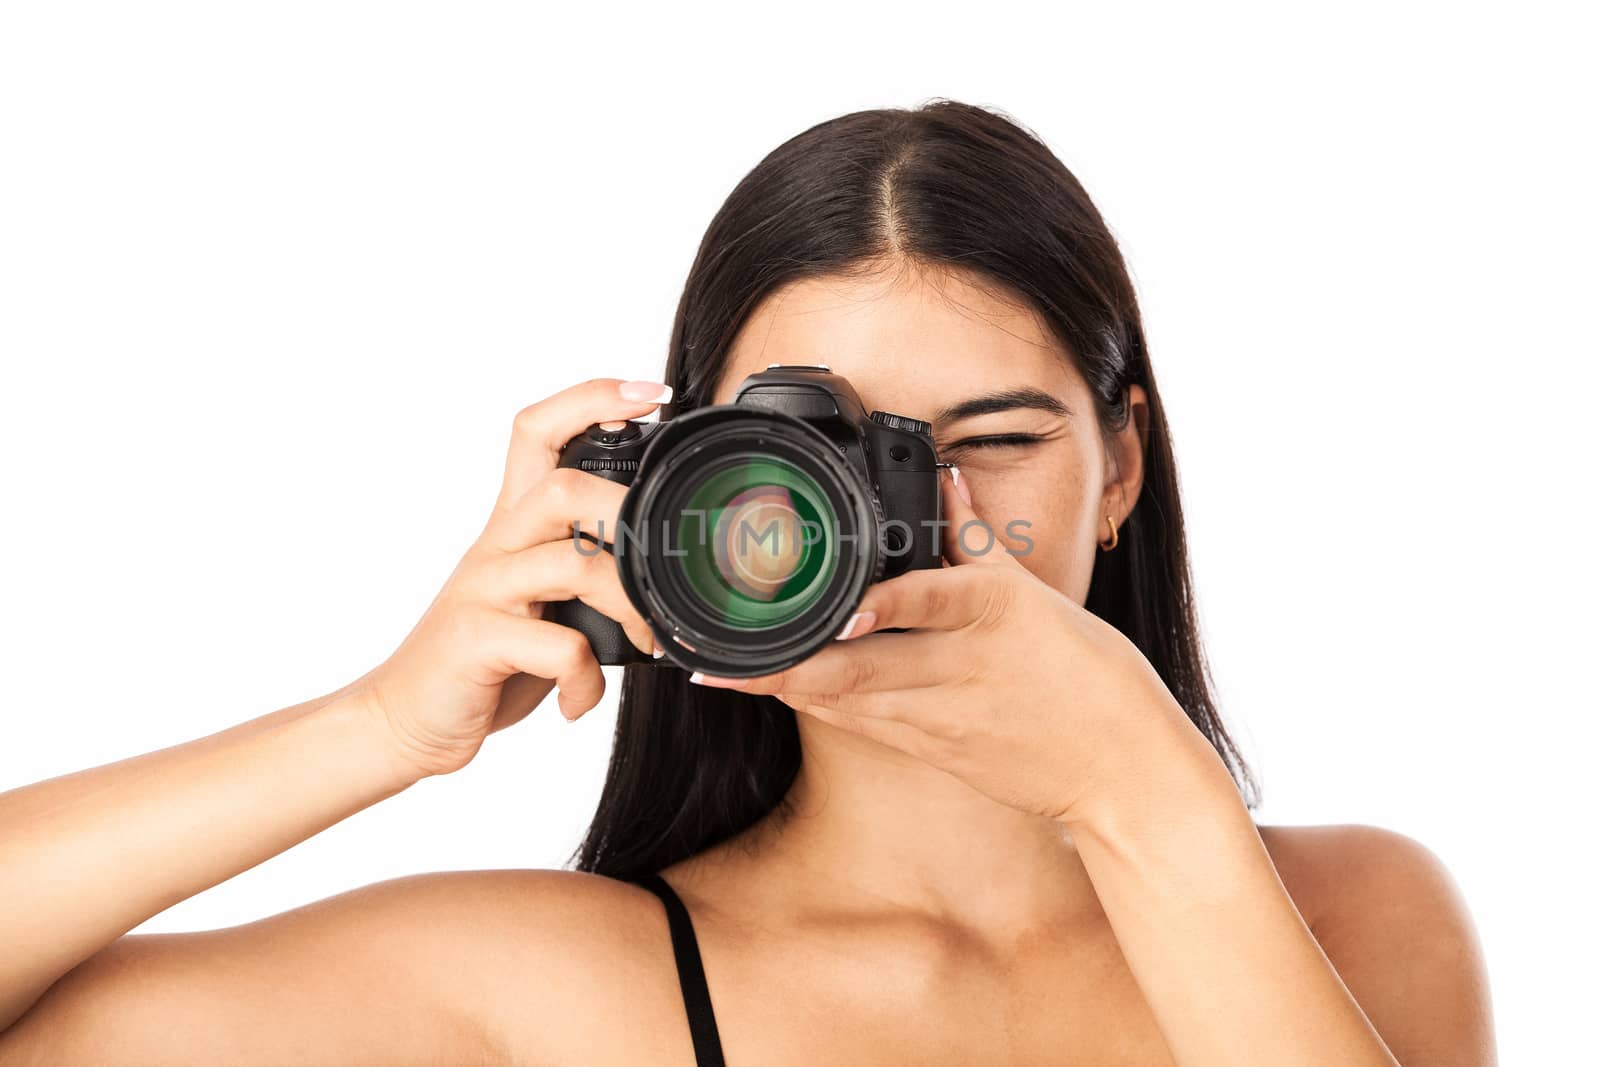 Closeup portrait of a young woman holding a camera by photobac